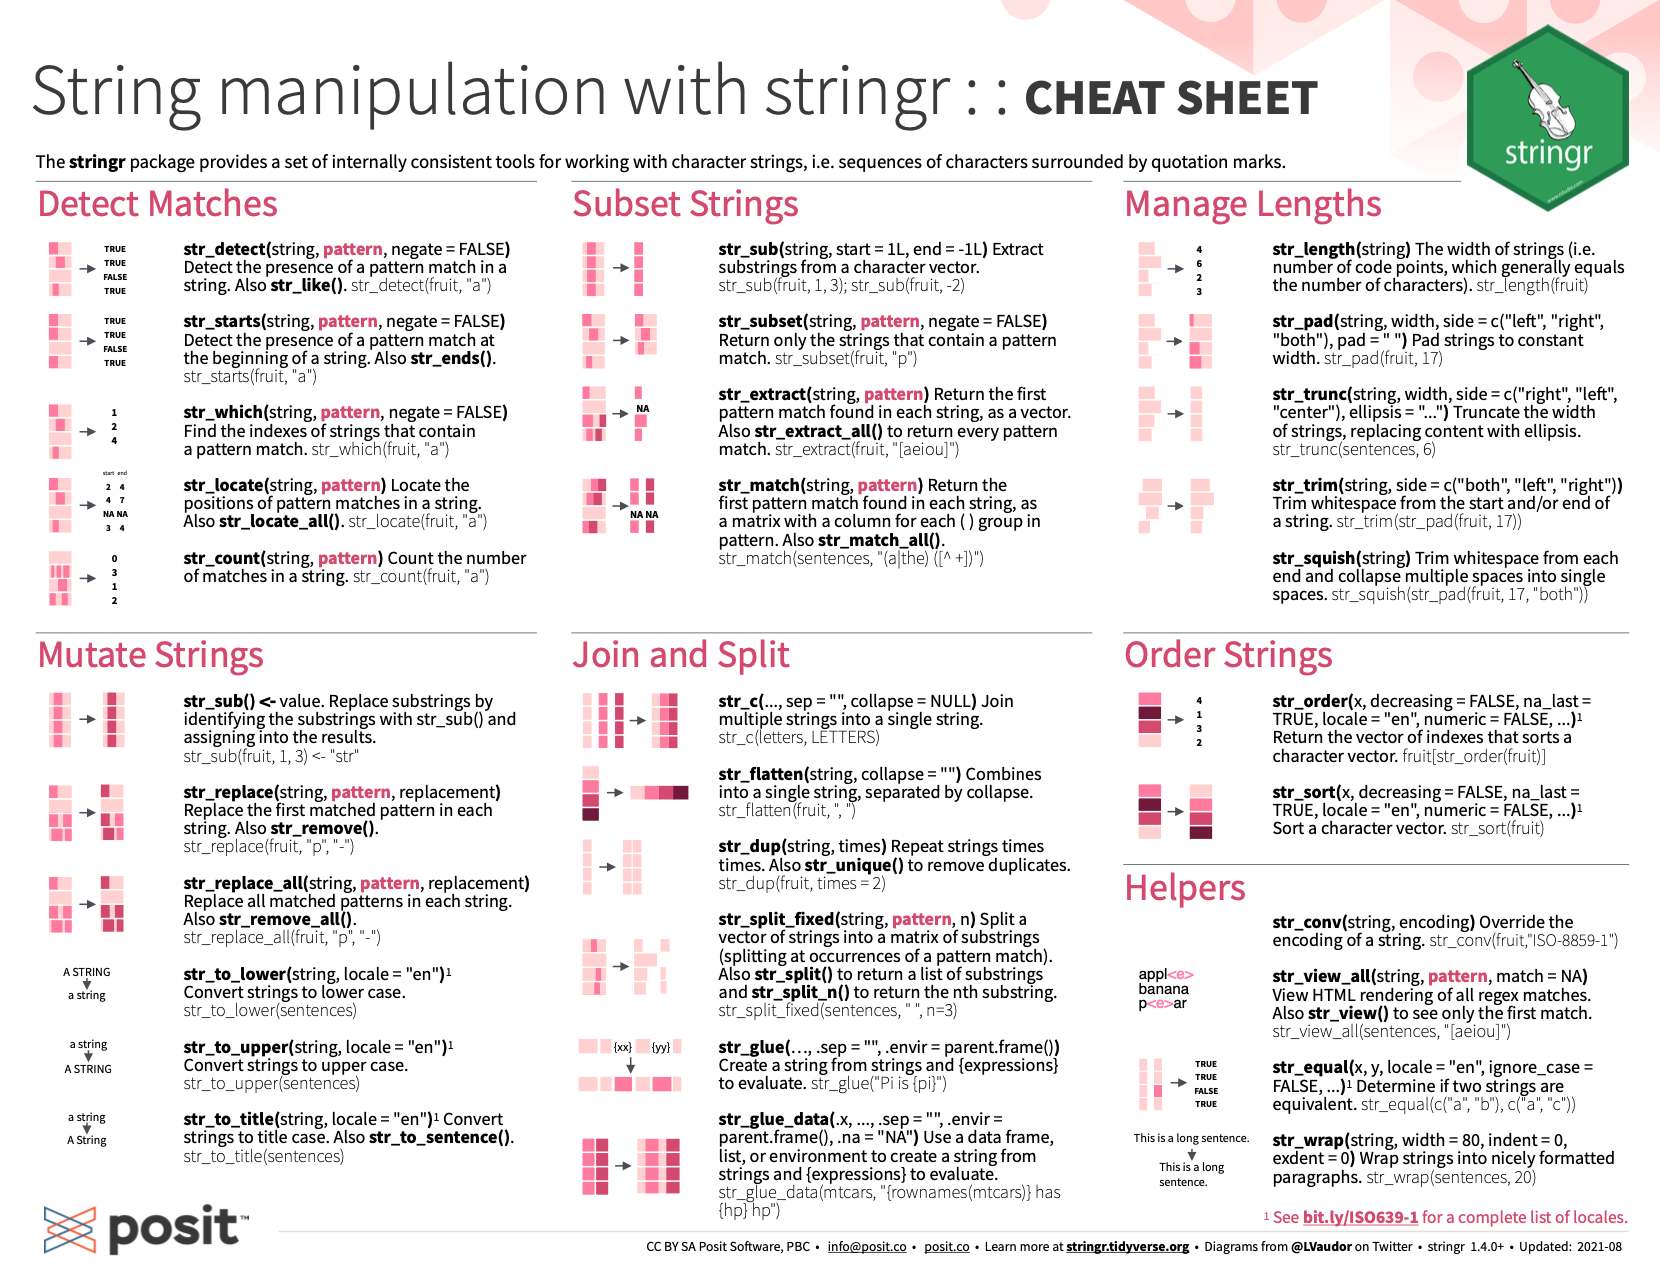 Text and string manipulation with stringr and regular expressions from Posit cheatsheets.